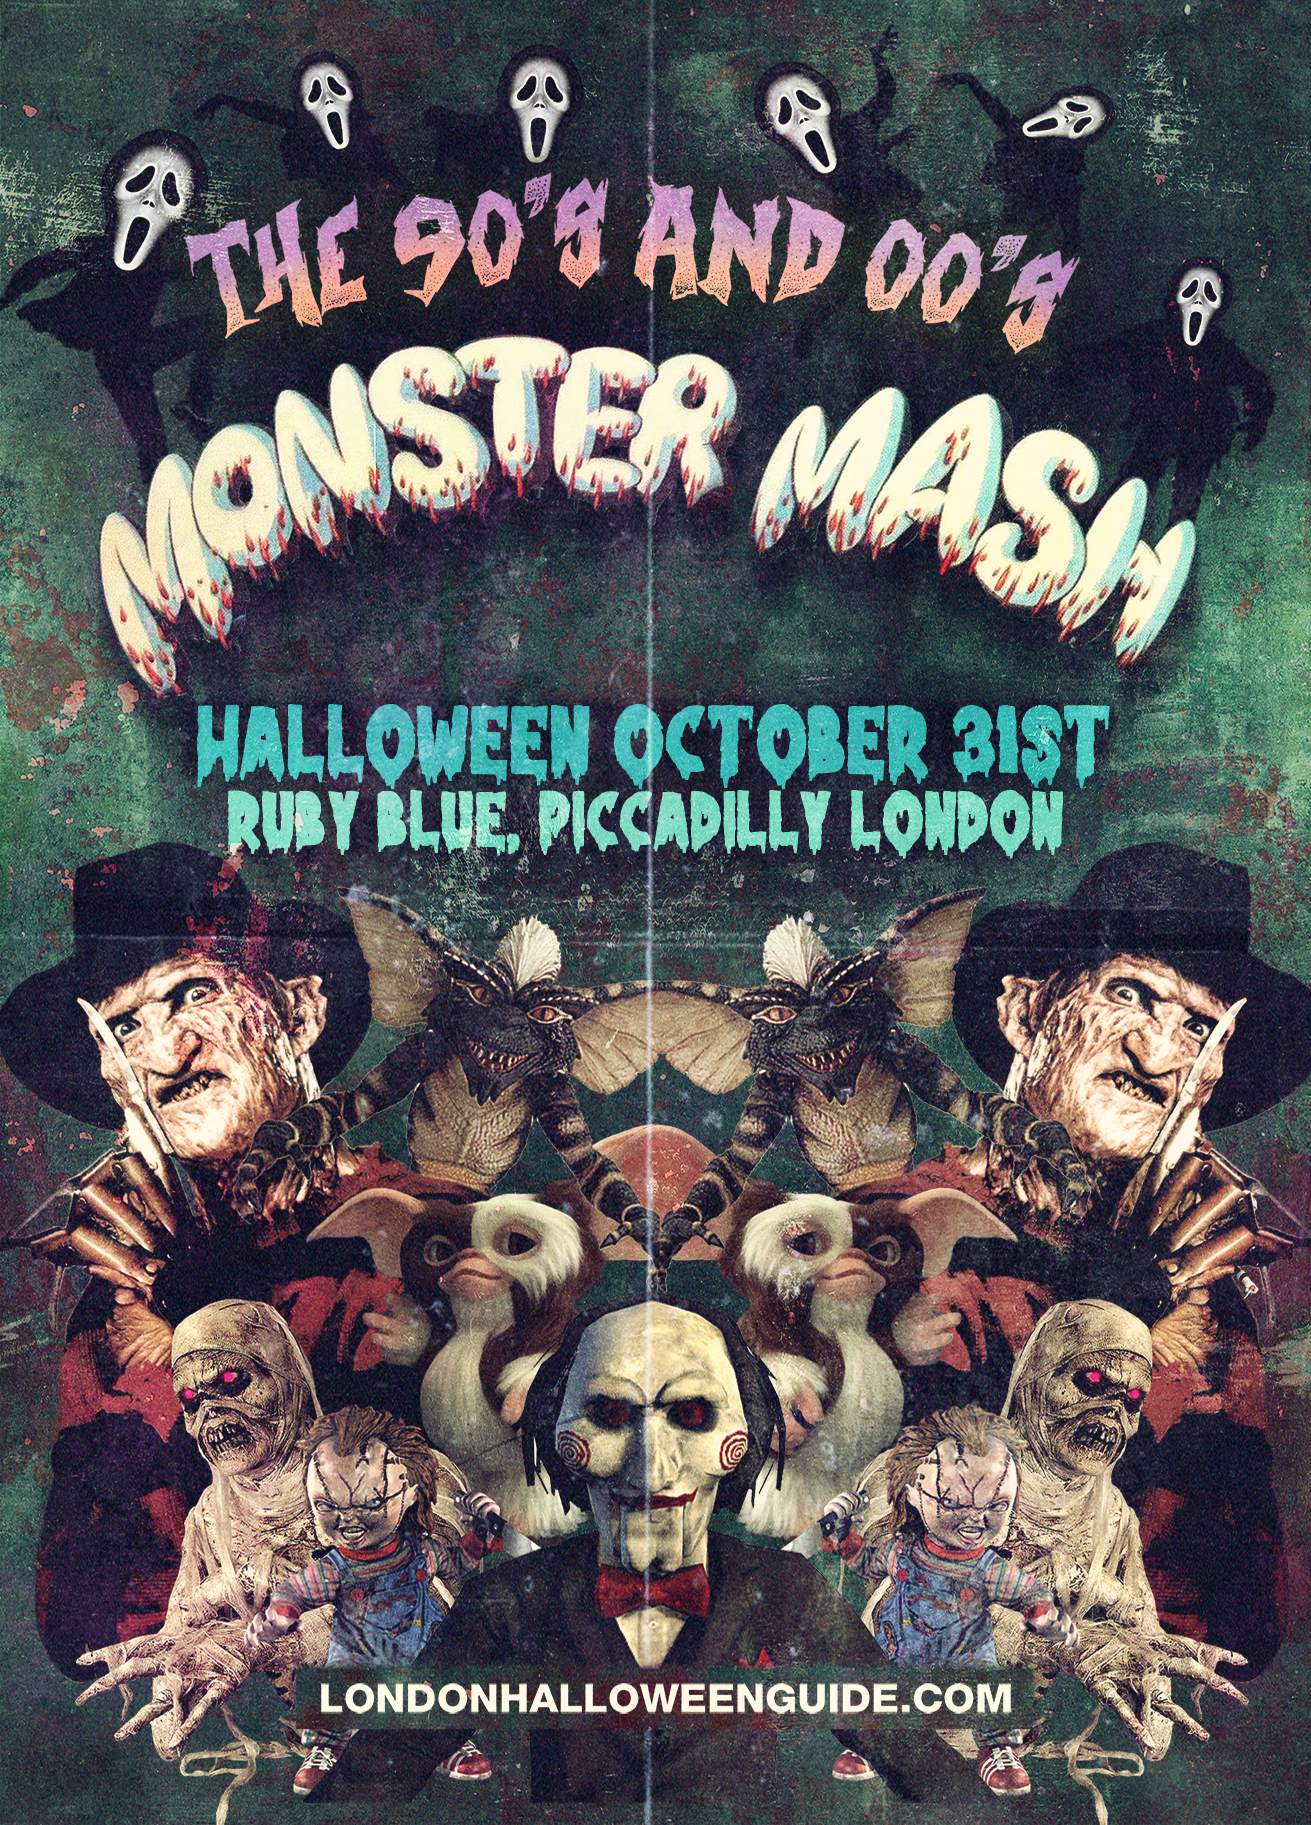 The Monster Mash - 90s & 00s Halloween Party - Página trasera